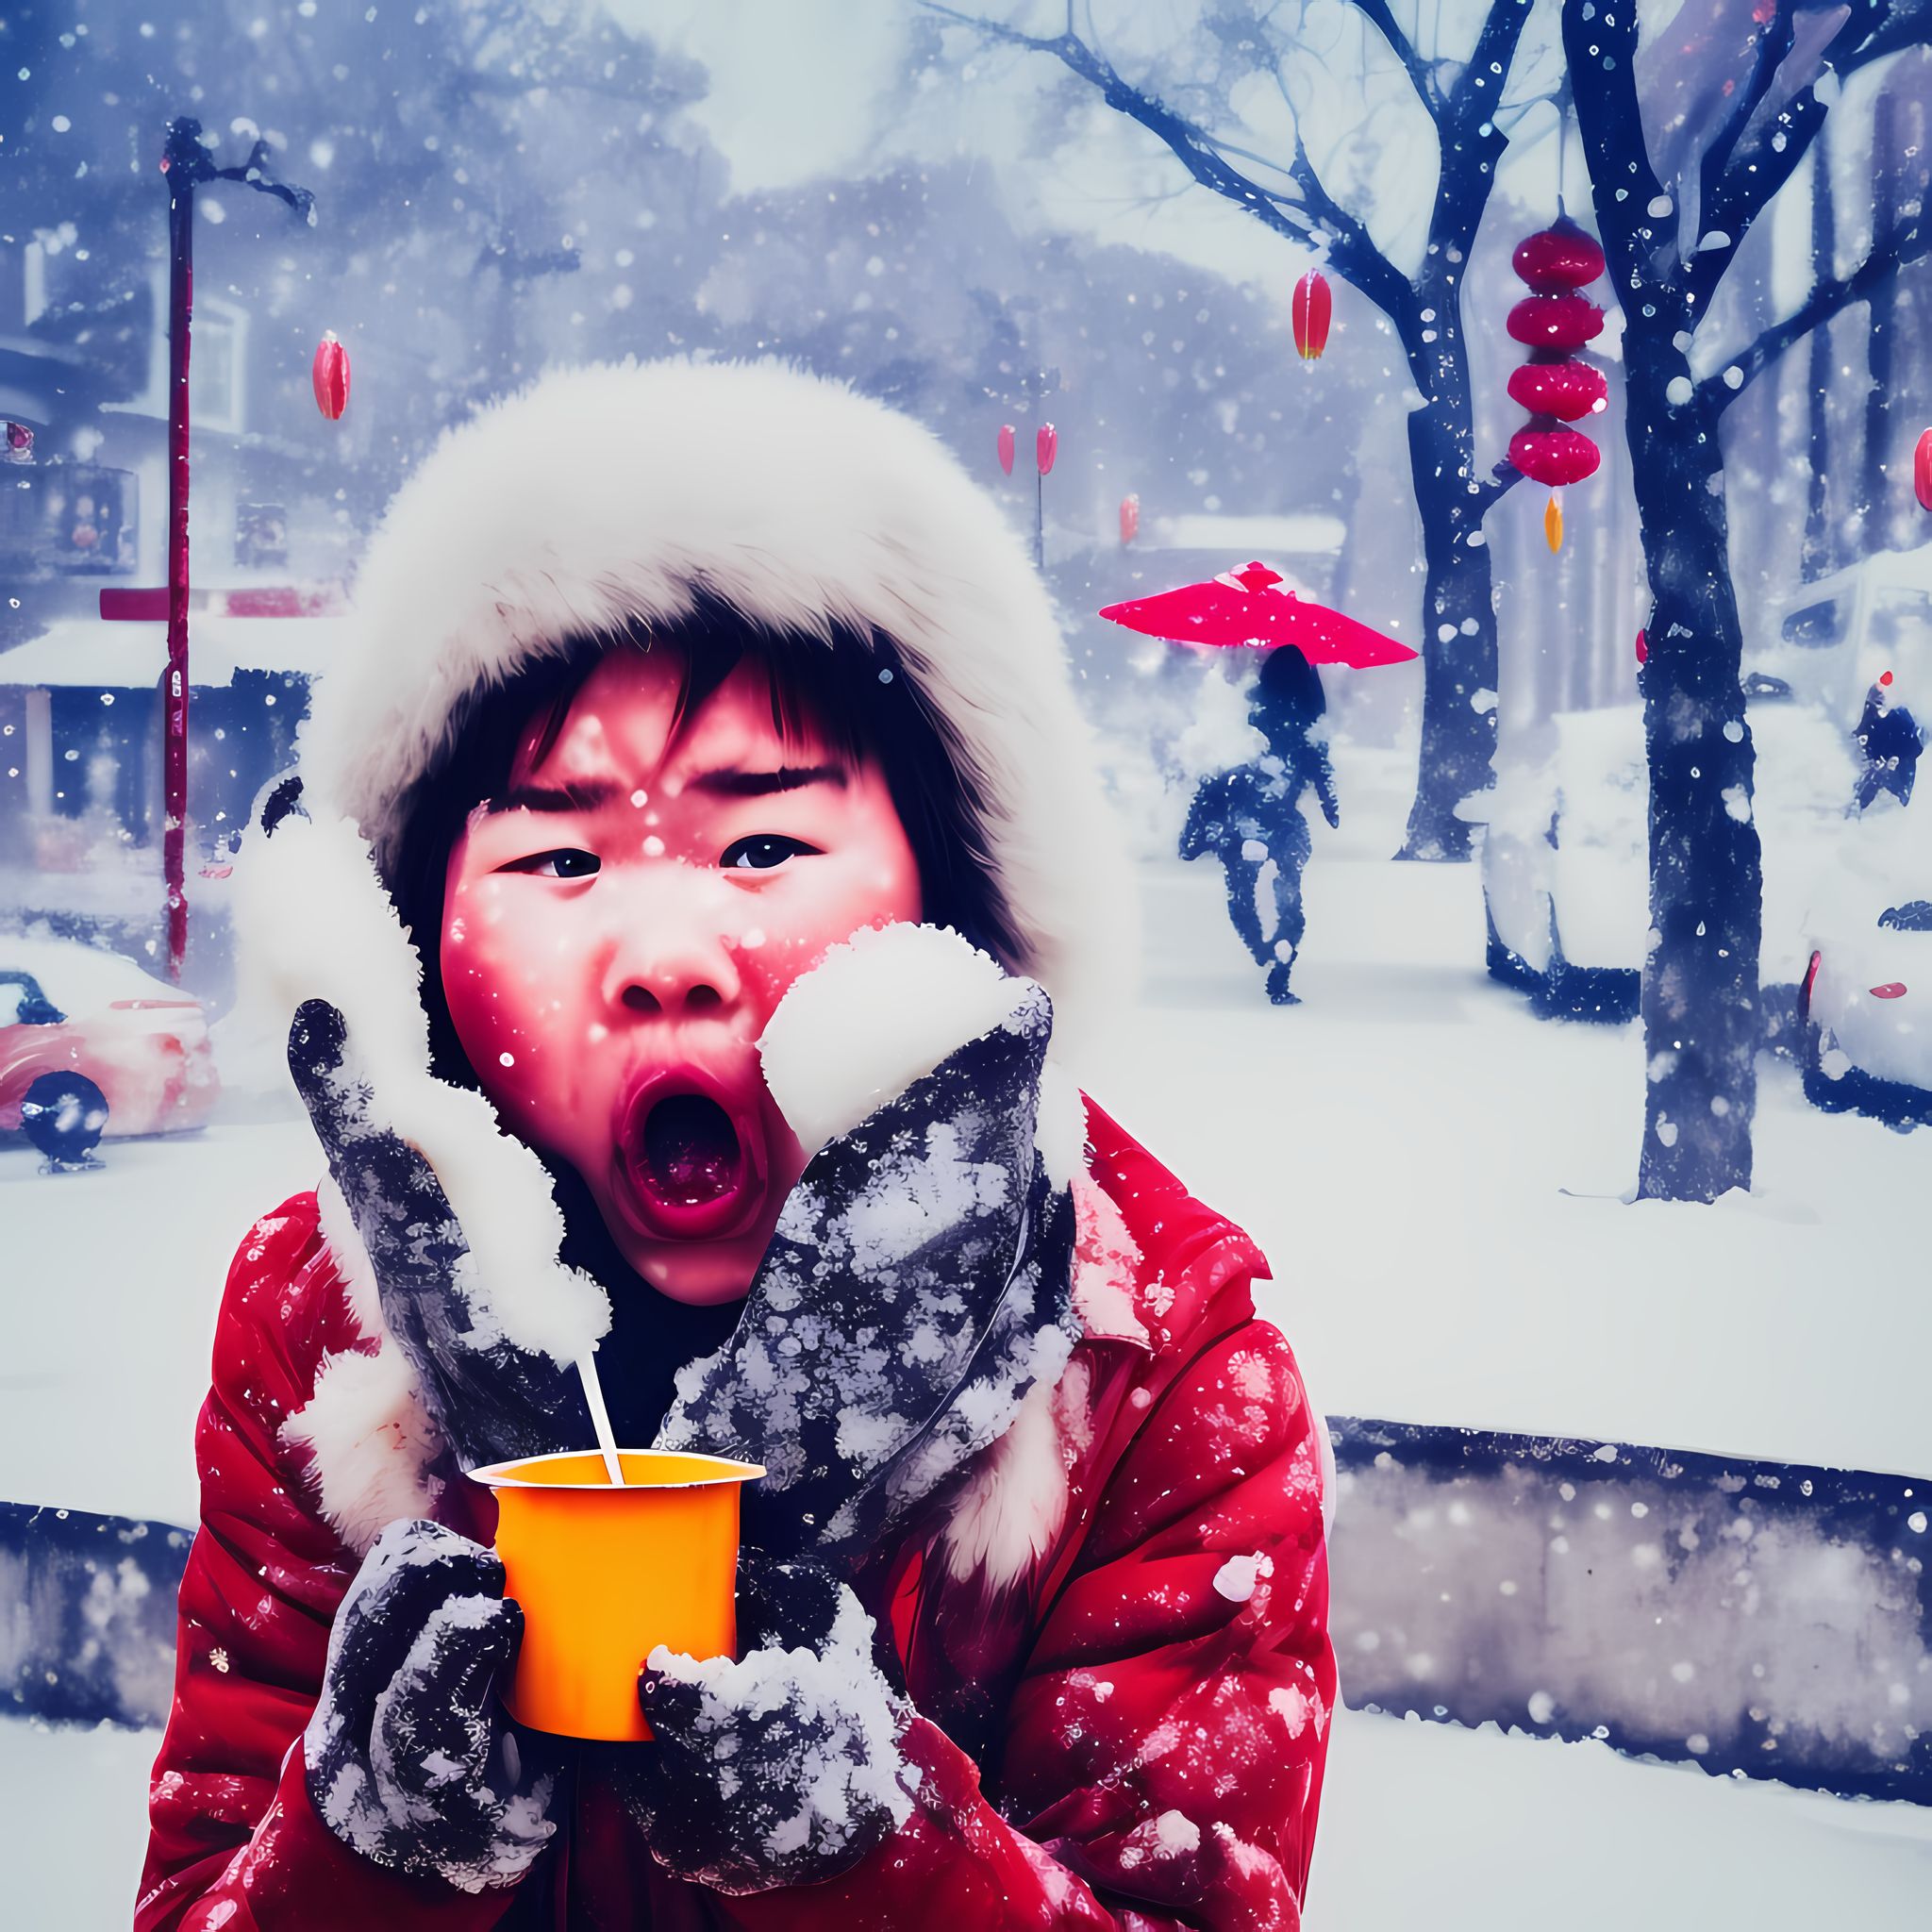 Painting-of-Chinese-food-winter-snow-person-eating-cold-color-sharp-focus-face-focused-trendi-7hz0